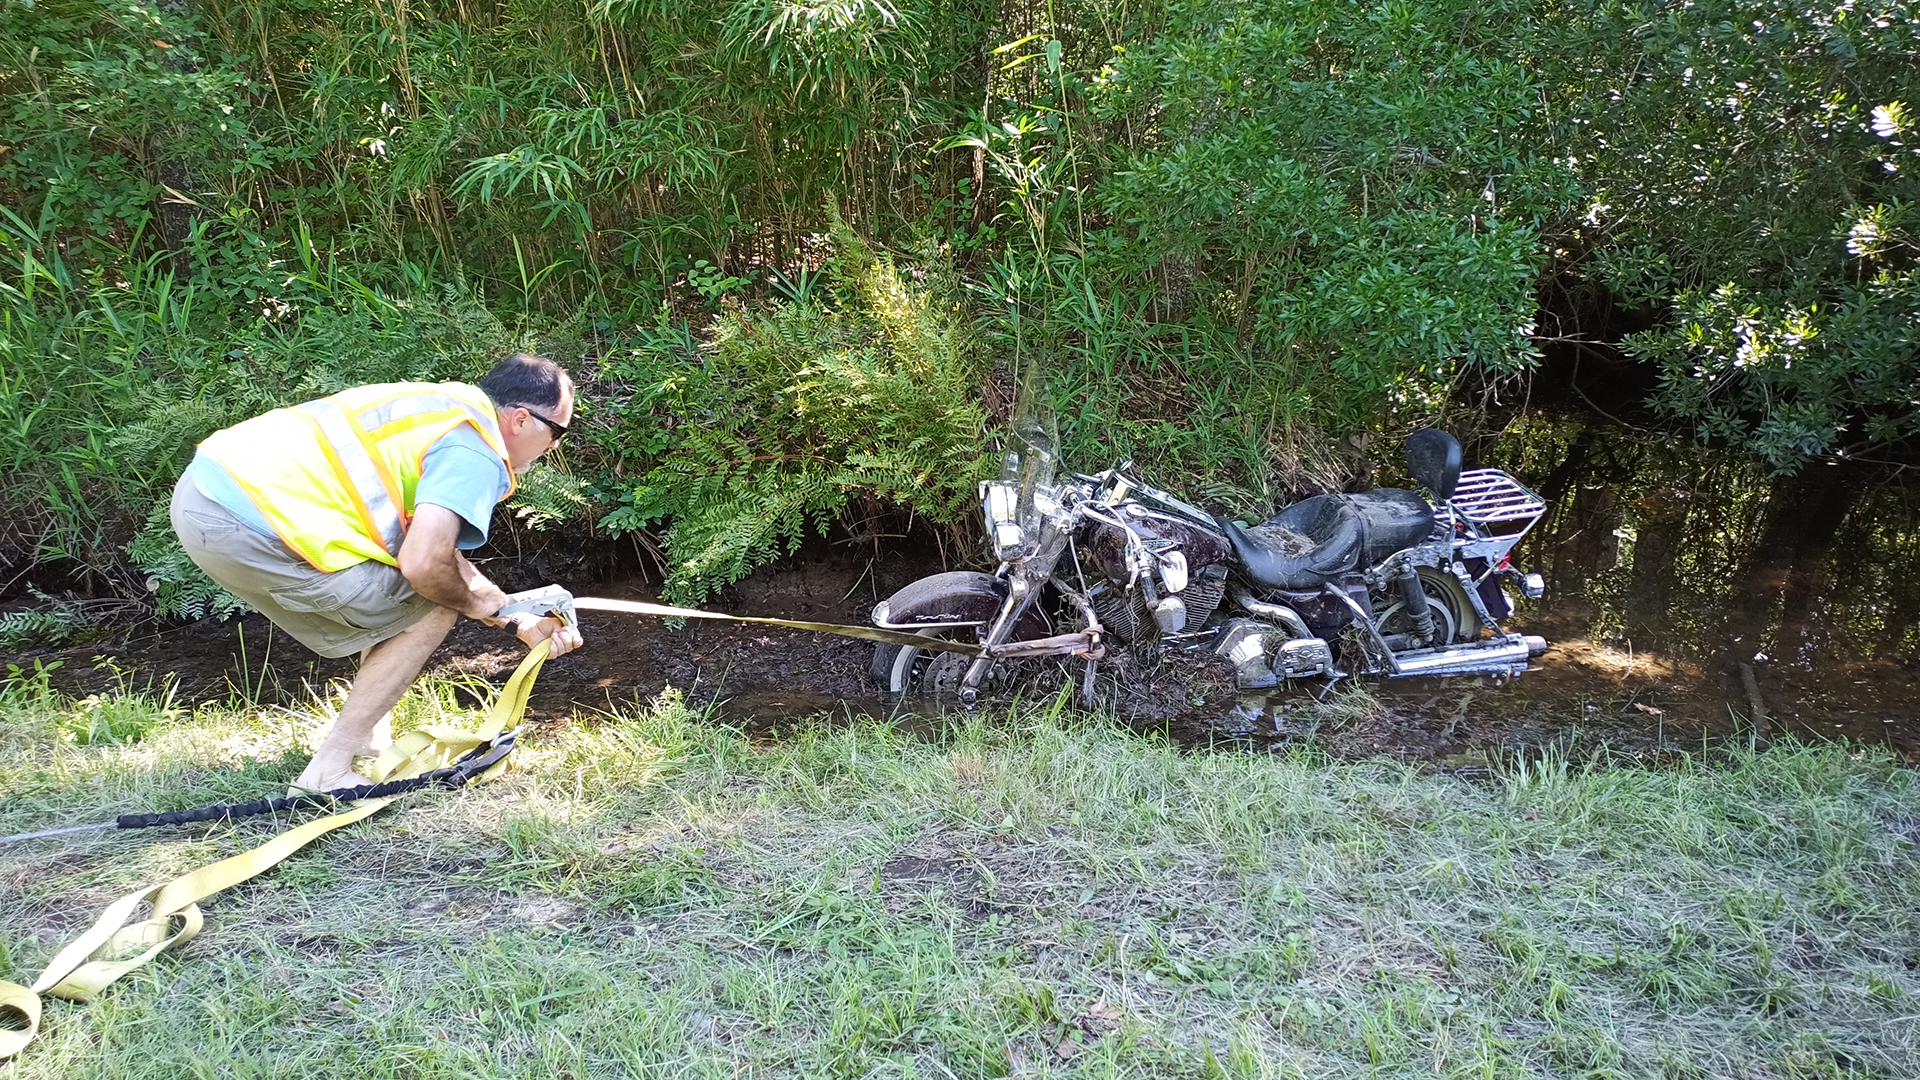 Motorcycle stuck in ditch Knotts Island